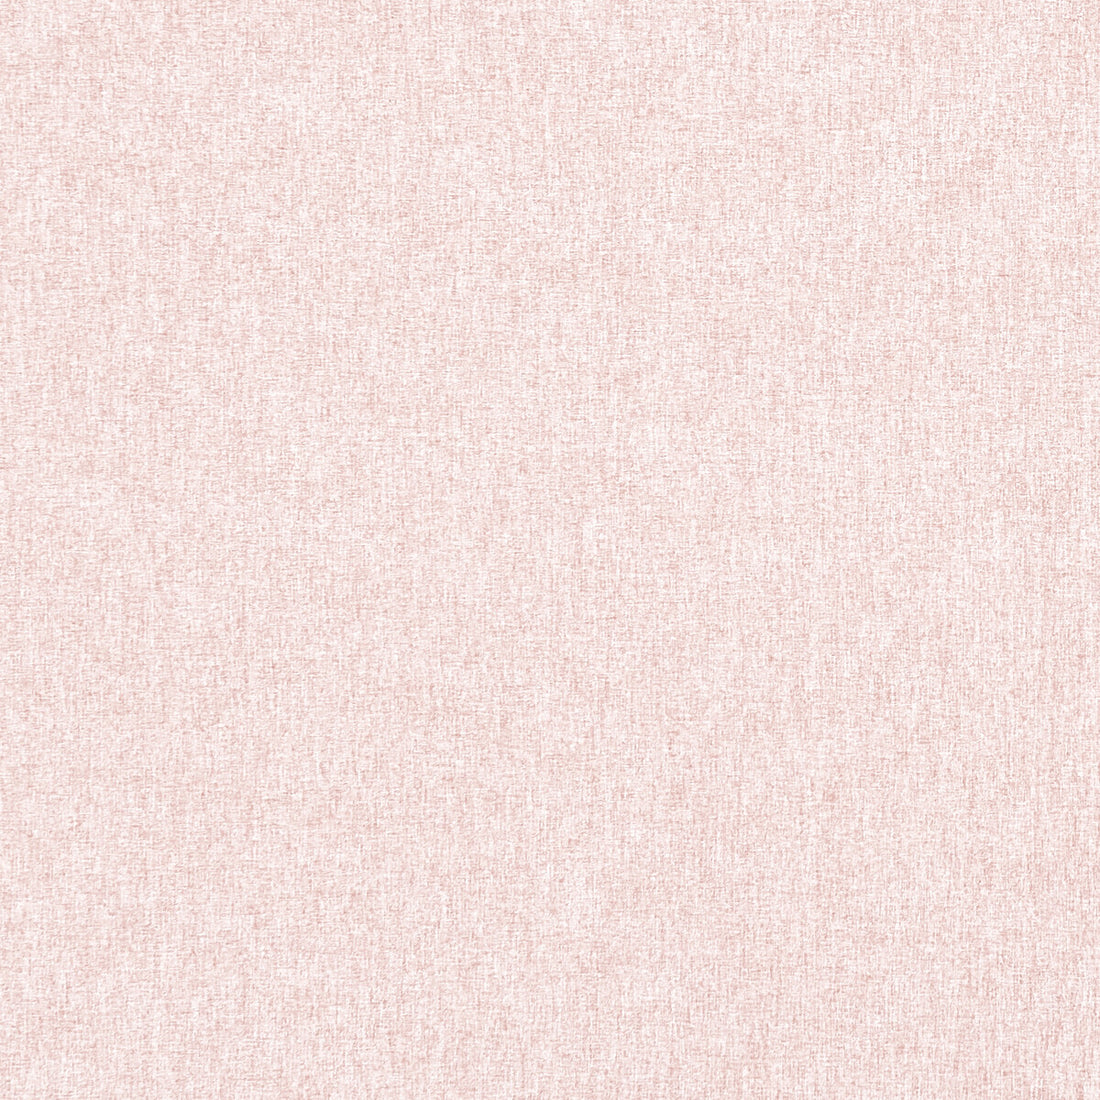 Highlander fabric in blush color - pattern F0848/33.CAC.0 - by Clarke And Clarke in the Clarke &amp; Clarke Highlander 2 collection